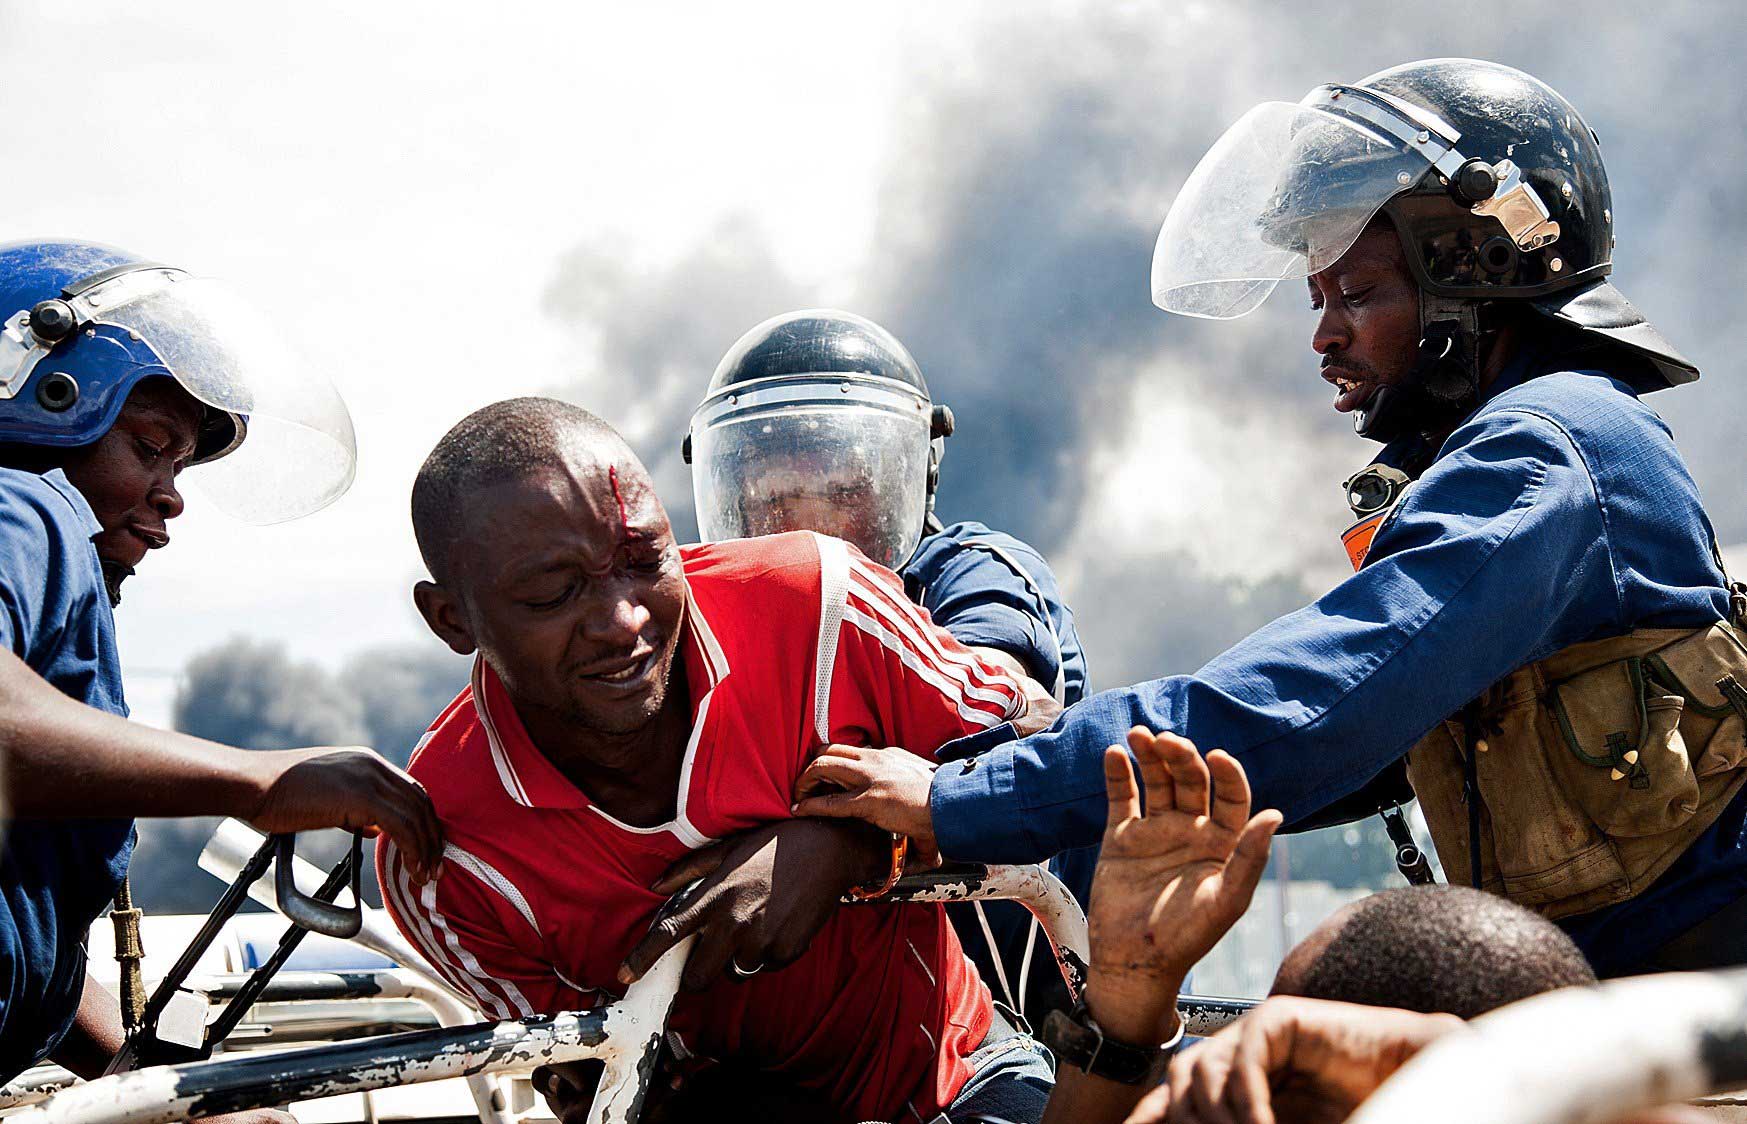 A man is lifted by police during a protest in Bujumbura on May 13, 2015.